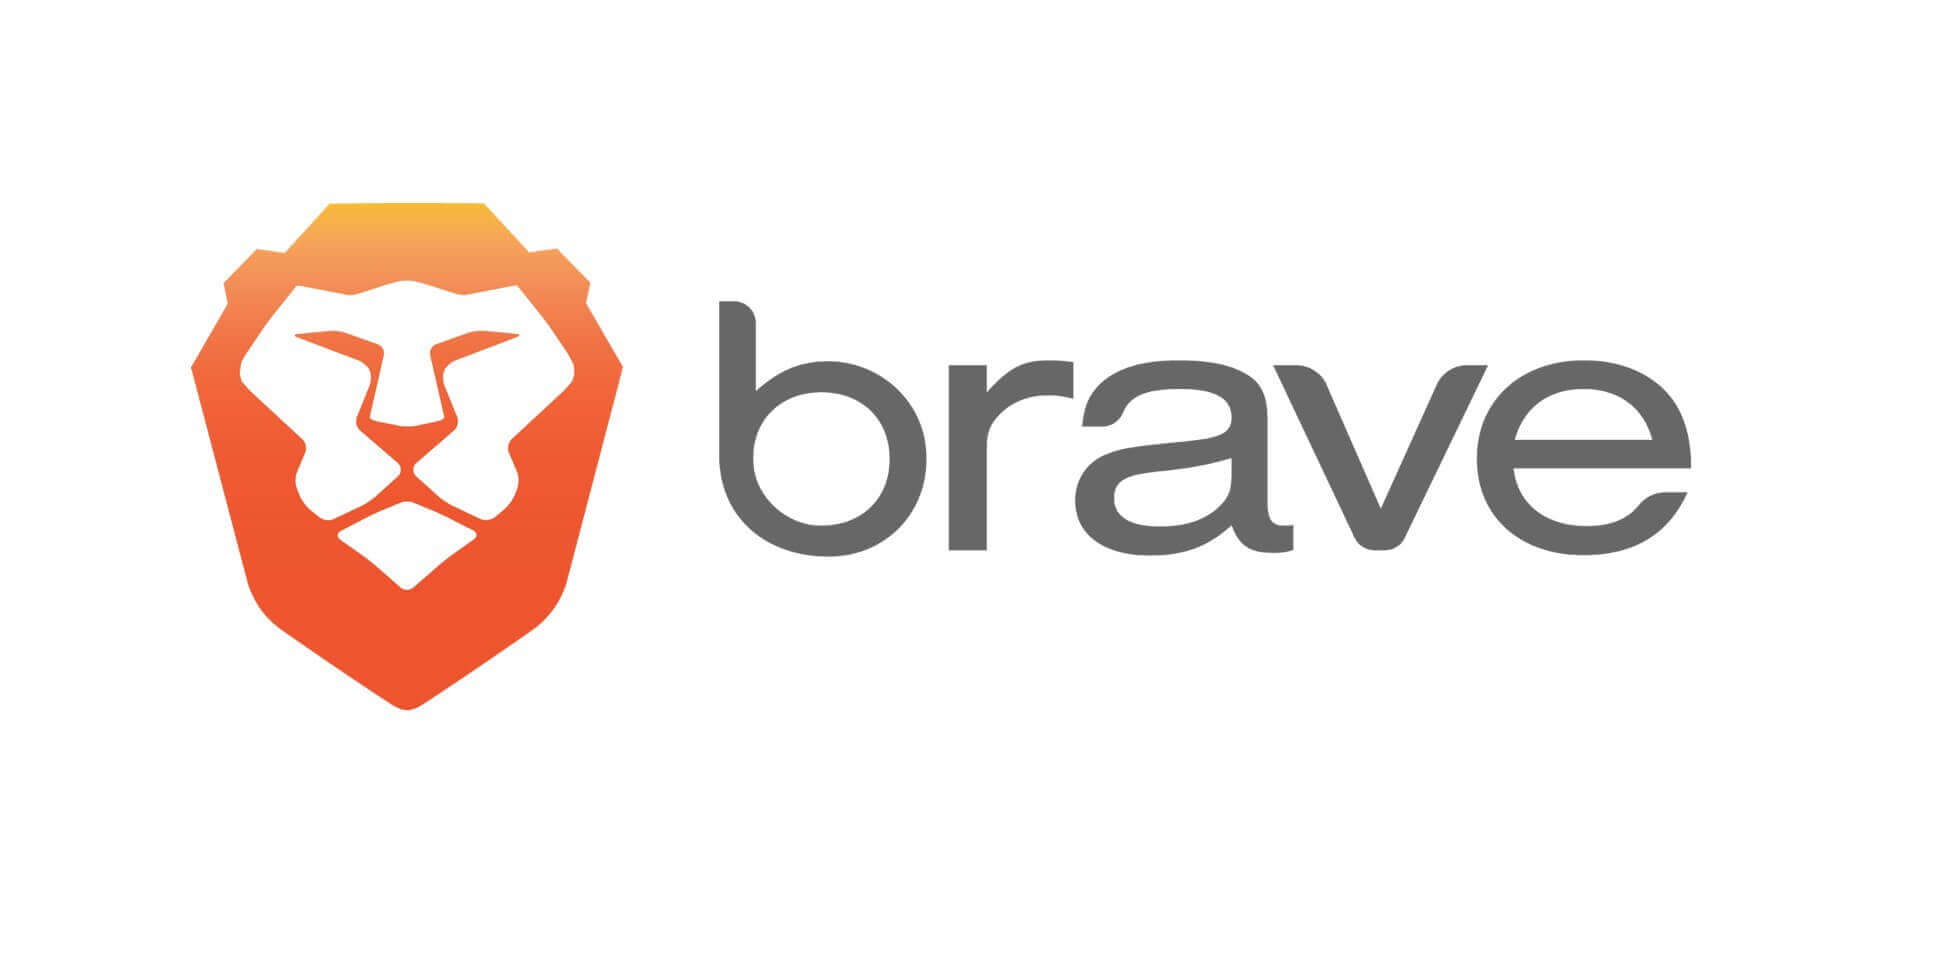 Brave Internet Browser with lion icon known for great security and privacy